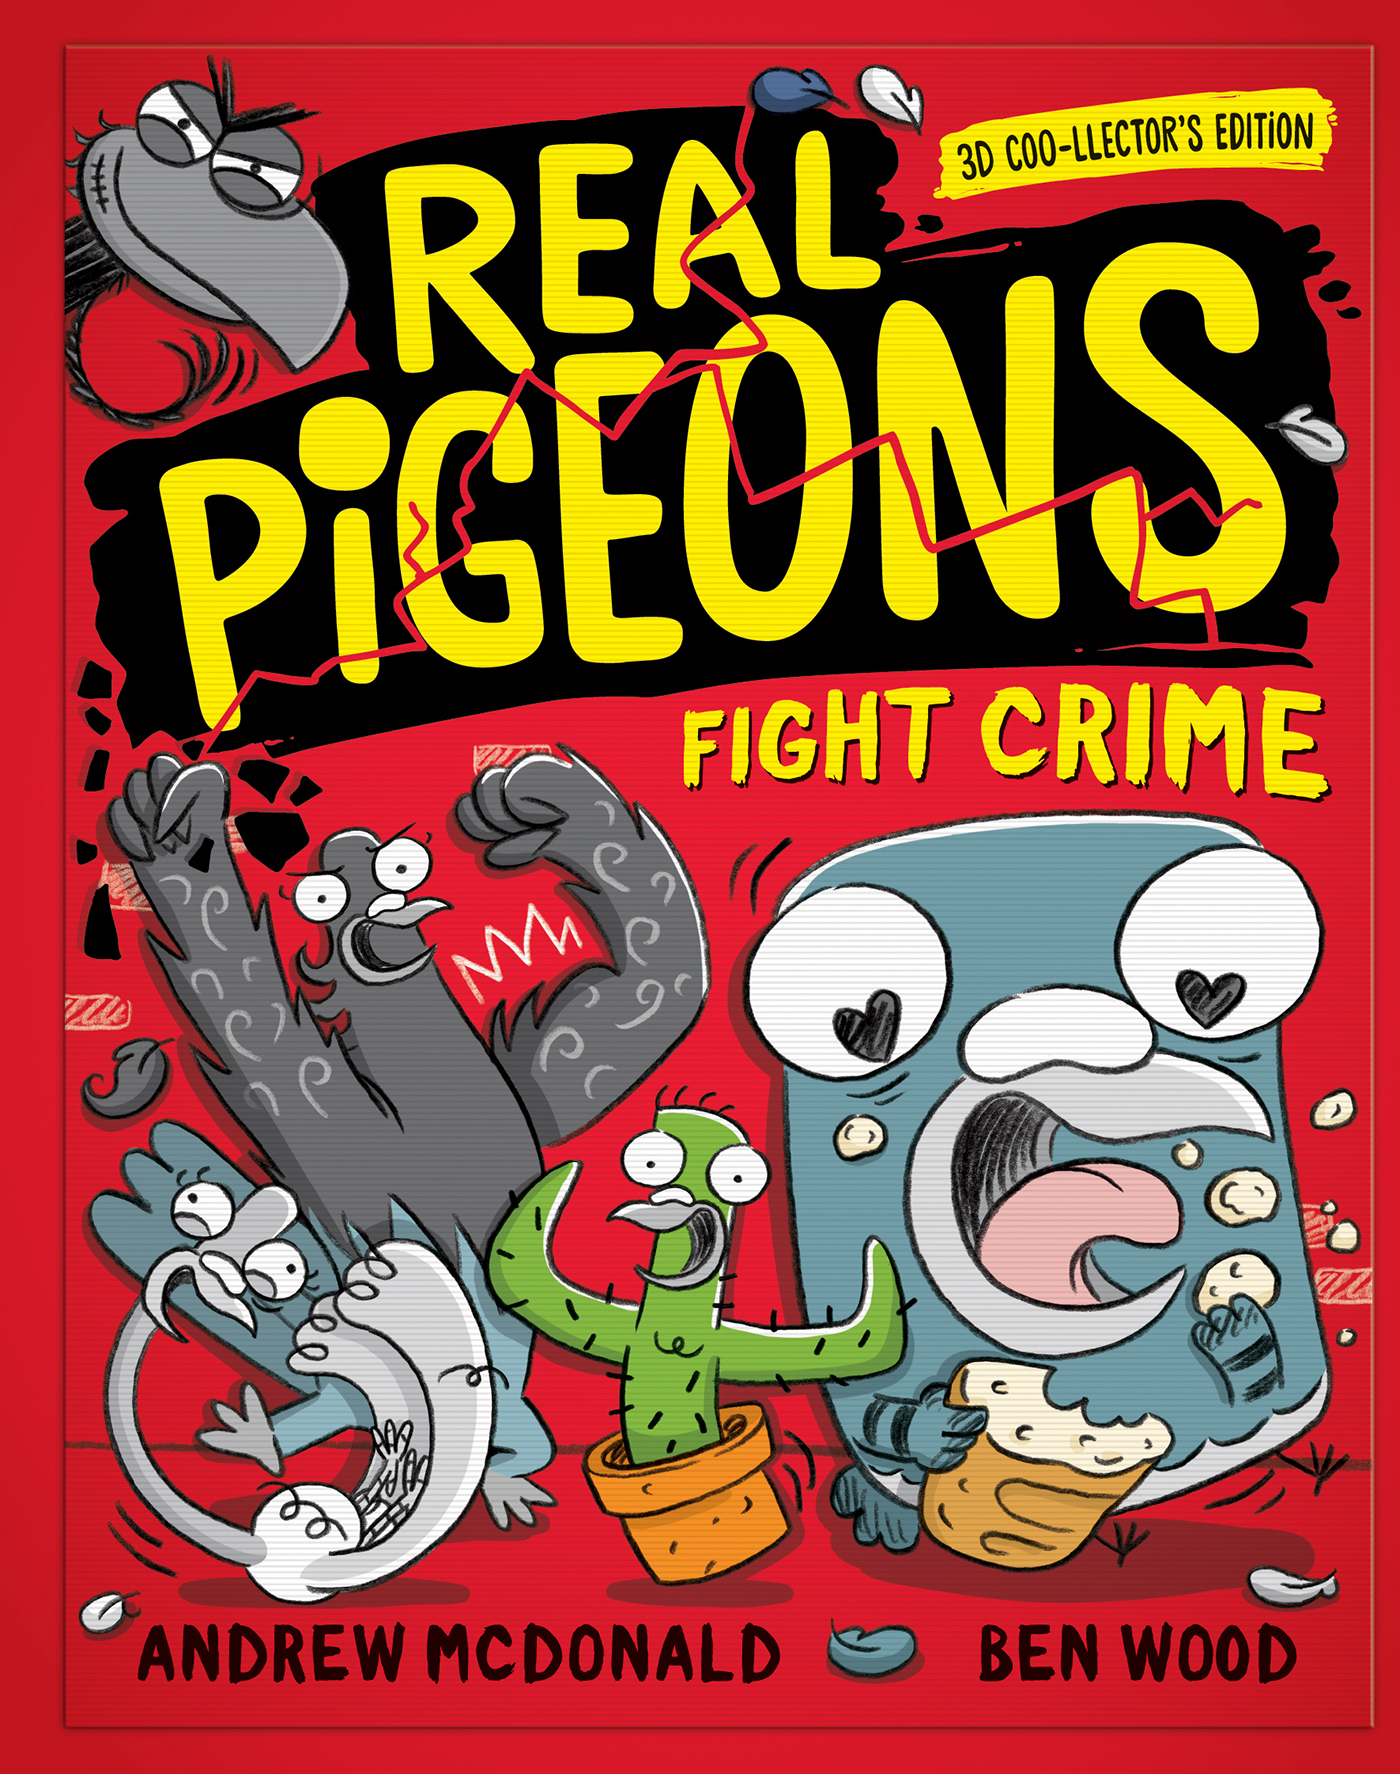 Real Pigeons Fight Crime: 3D Coo-llector's Edition